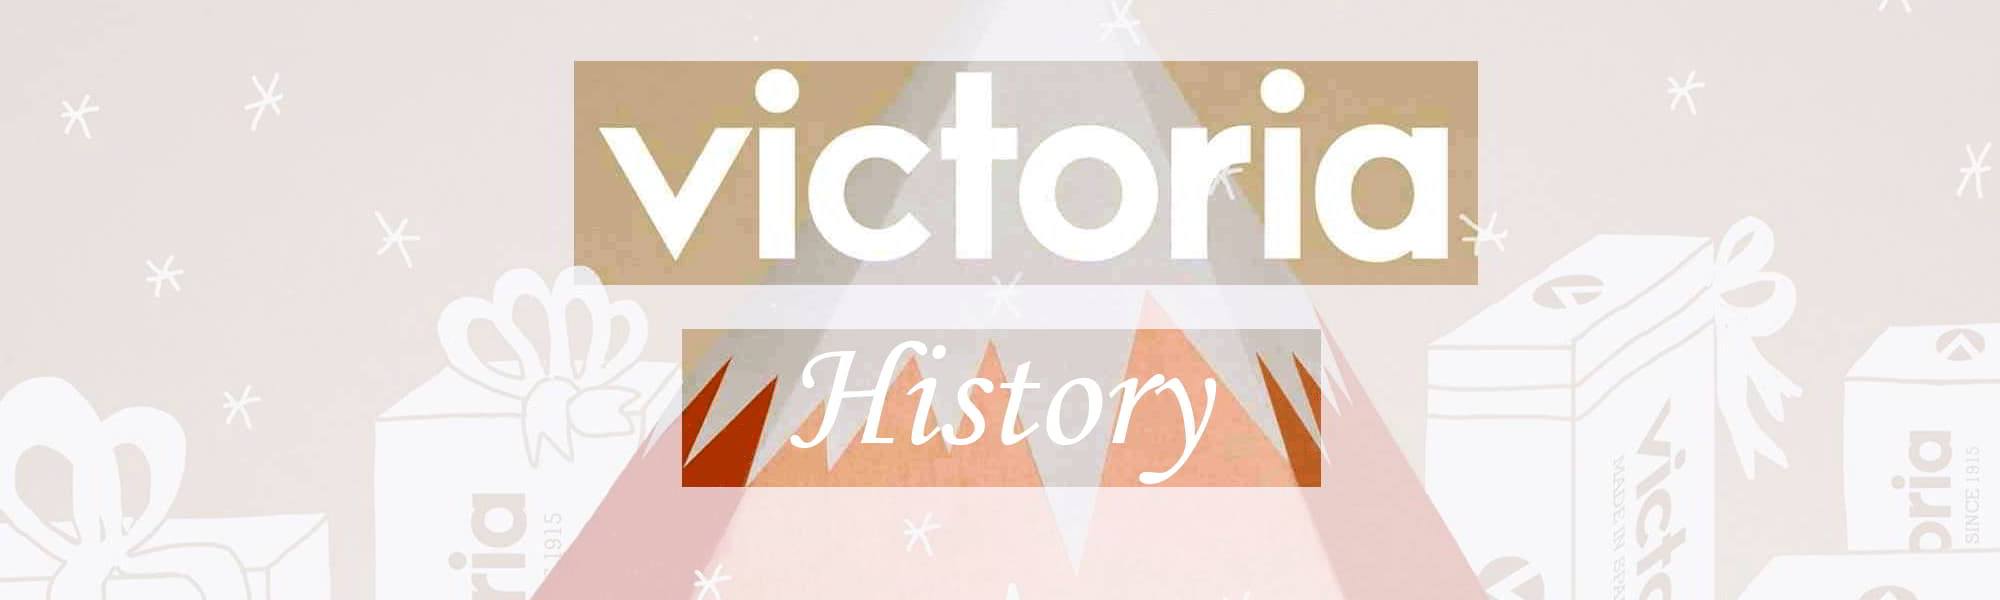 Victoria Shoes History Banner